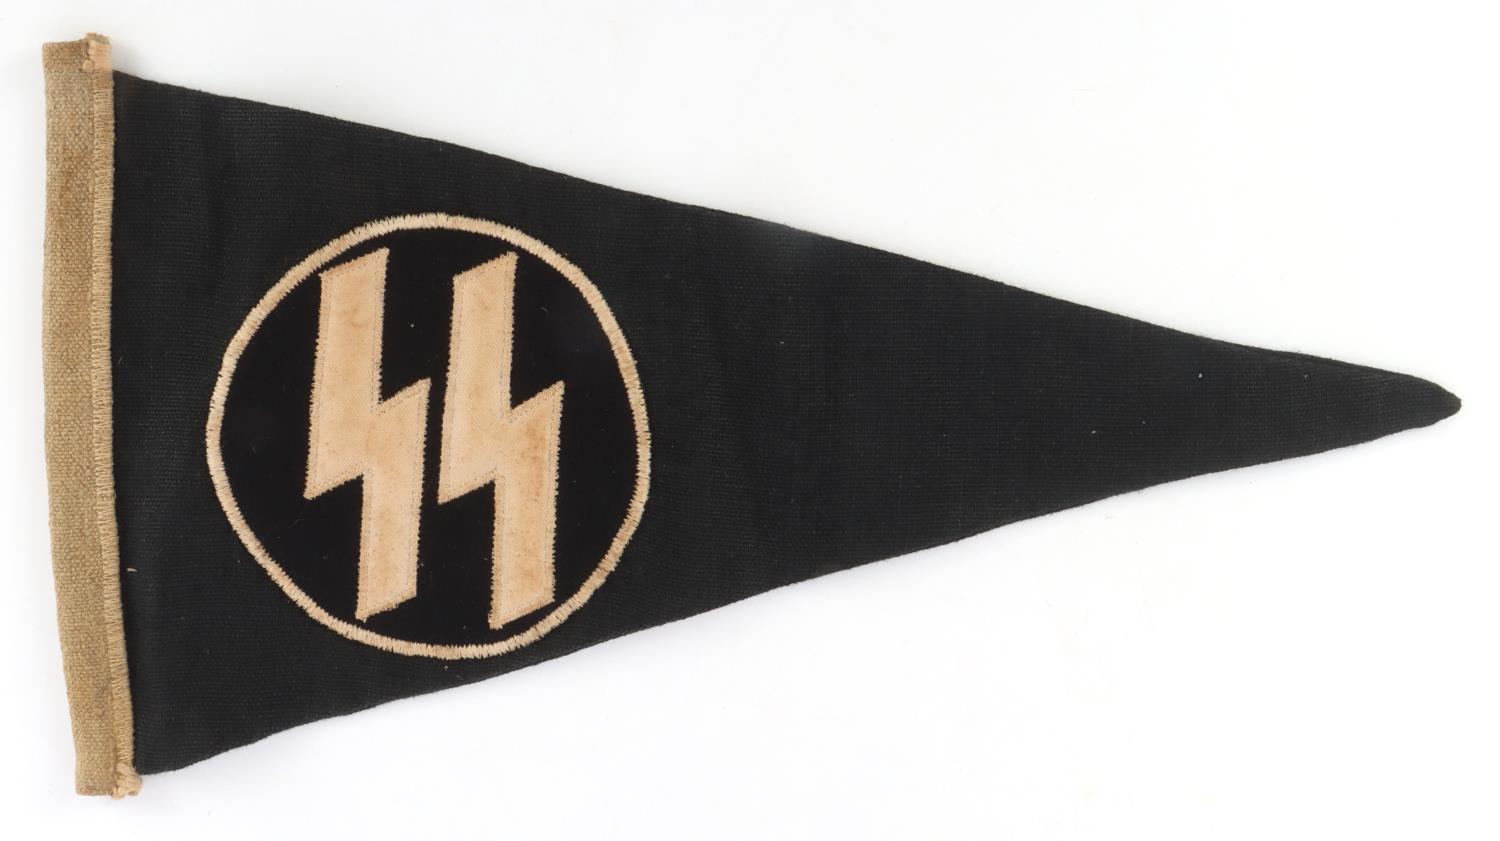 WWII GERMAN WAFFEN SS PANZER DIVISION PENNANT